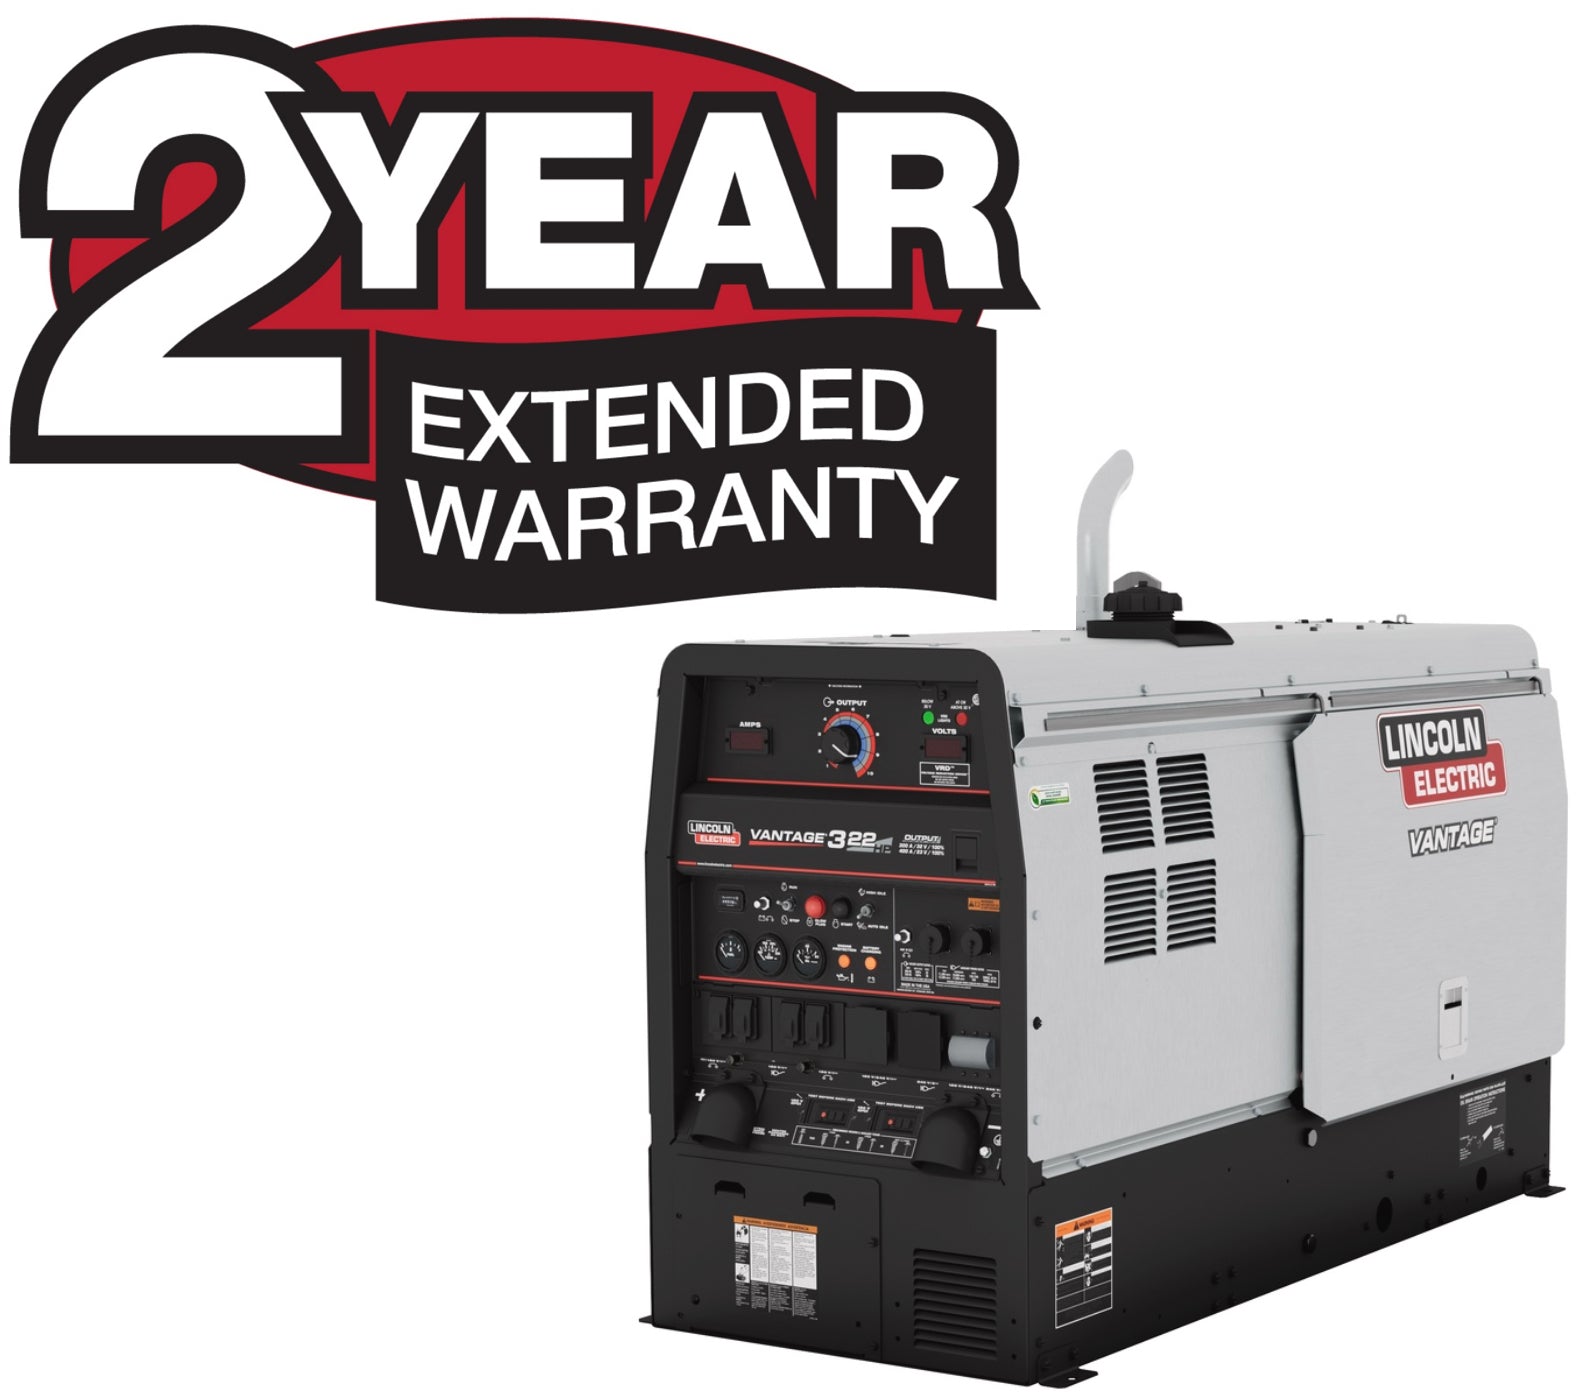 Lincoln 2-Year Extended Warranty - Vantage 332 X2409